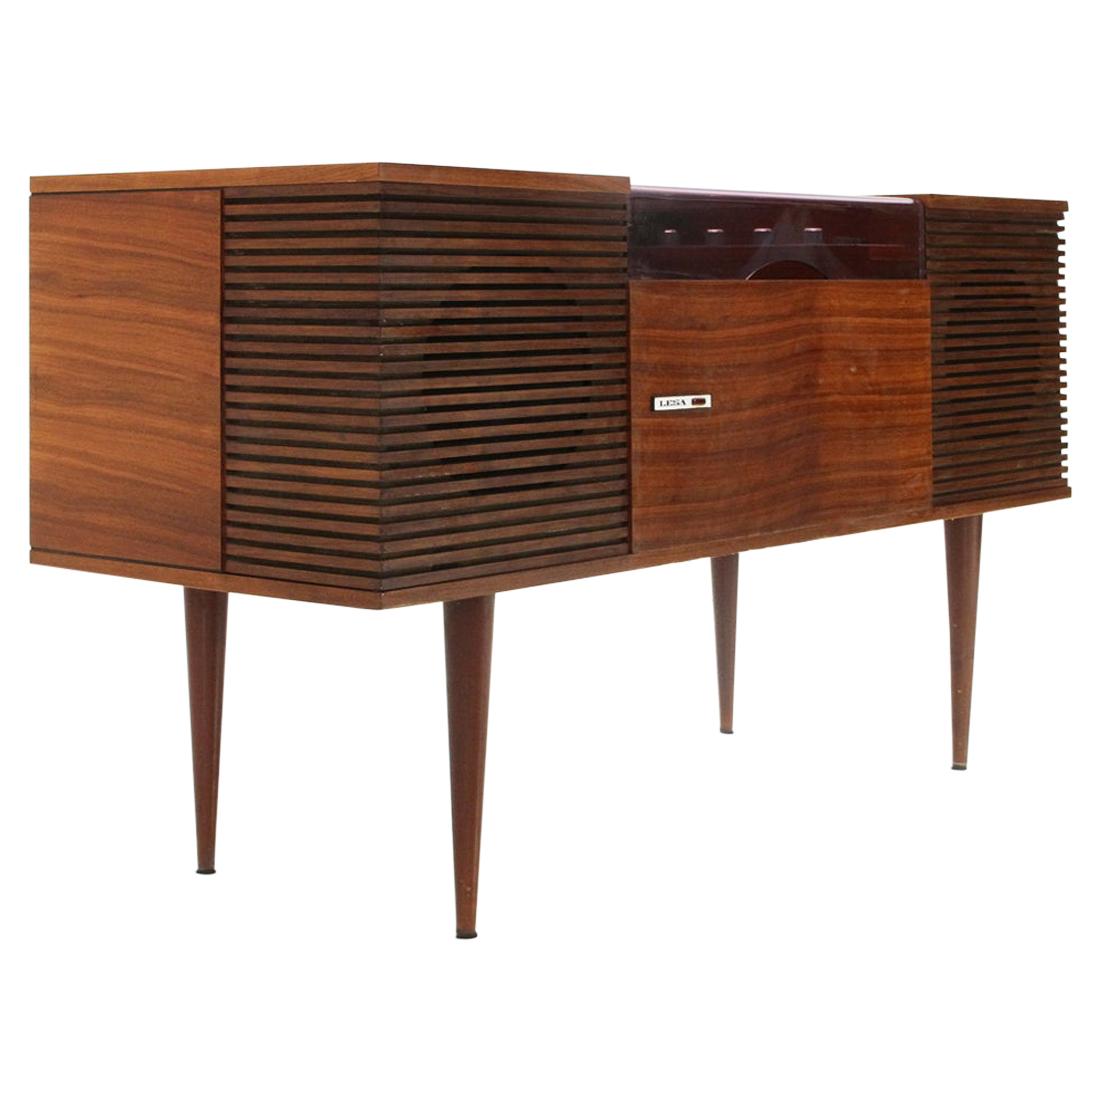 Lesa "LF730" Turntable Stereo Console, 1960s